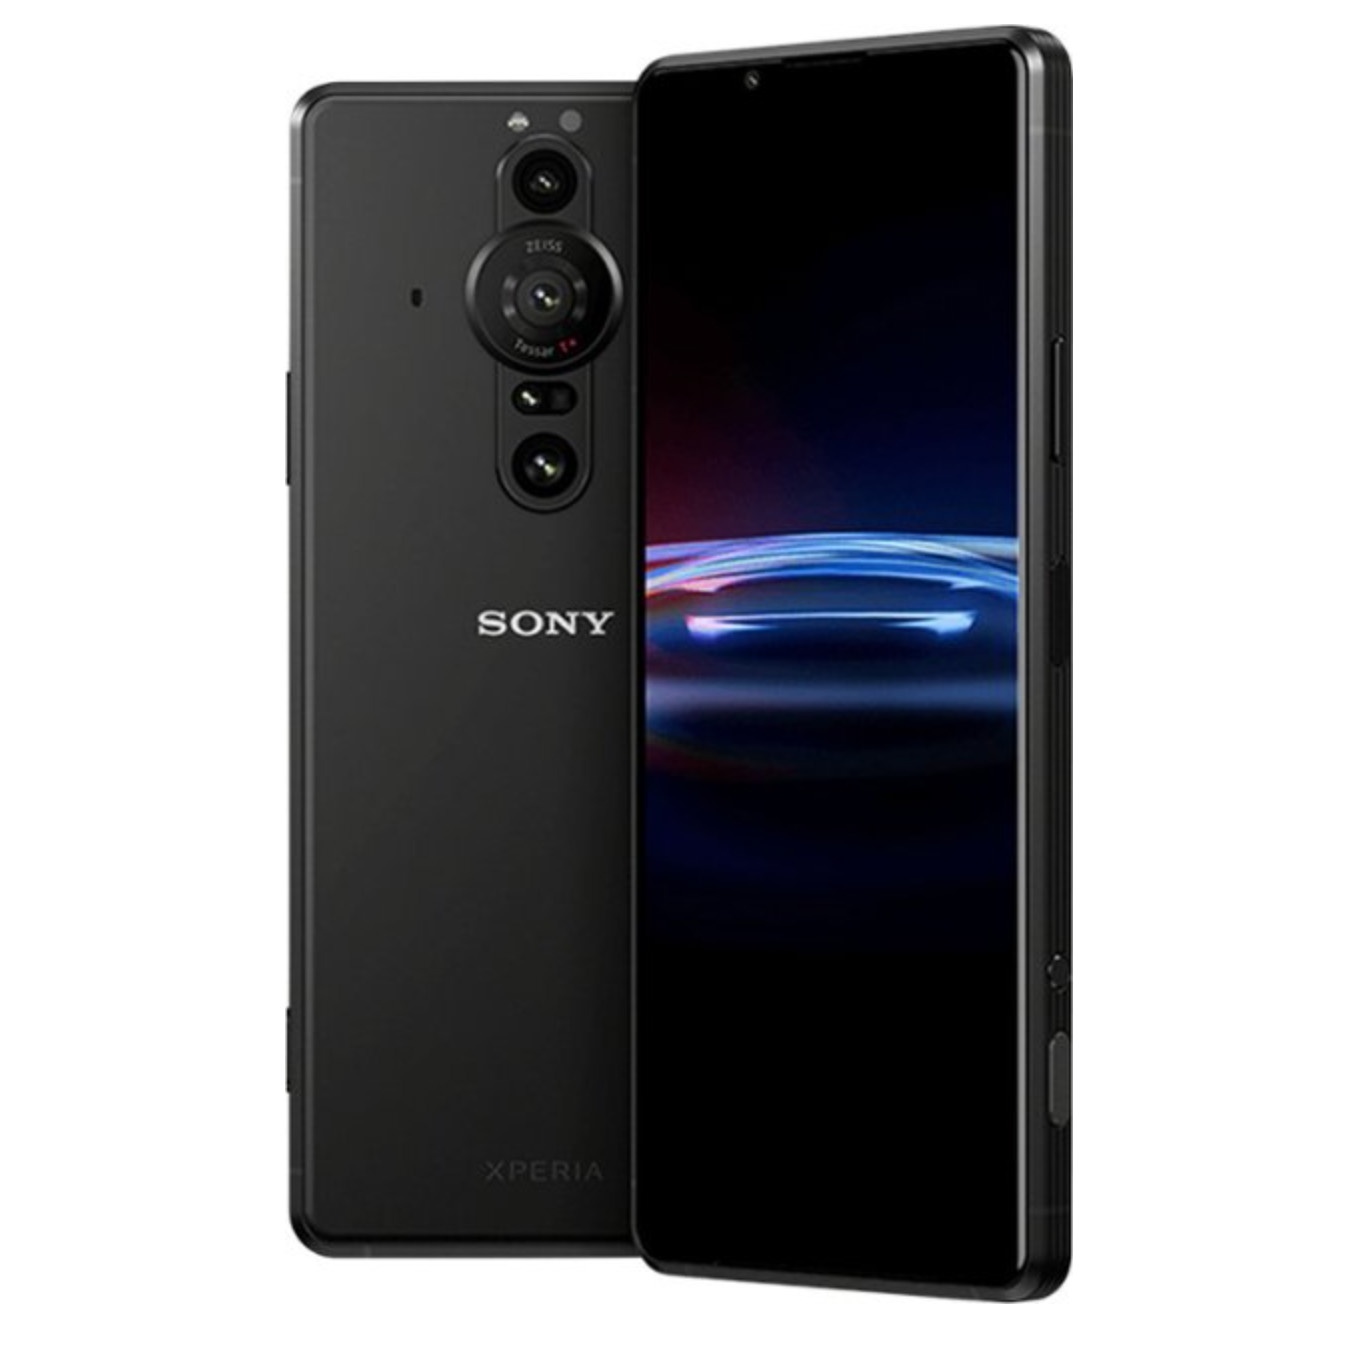 Sony Xperia front and back view in black